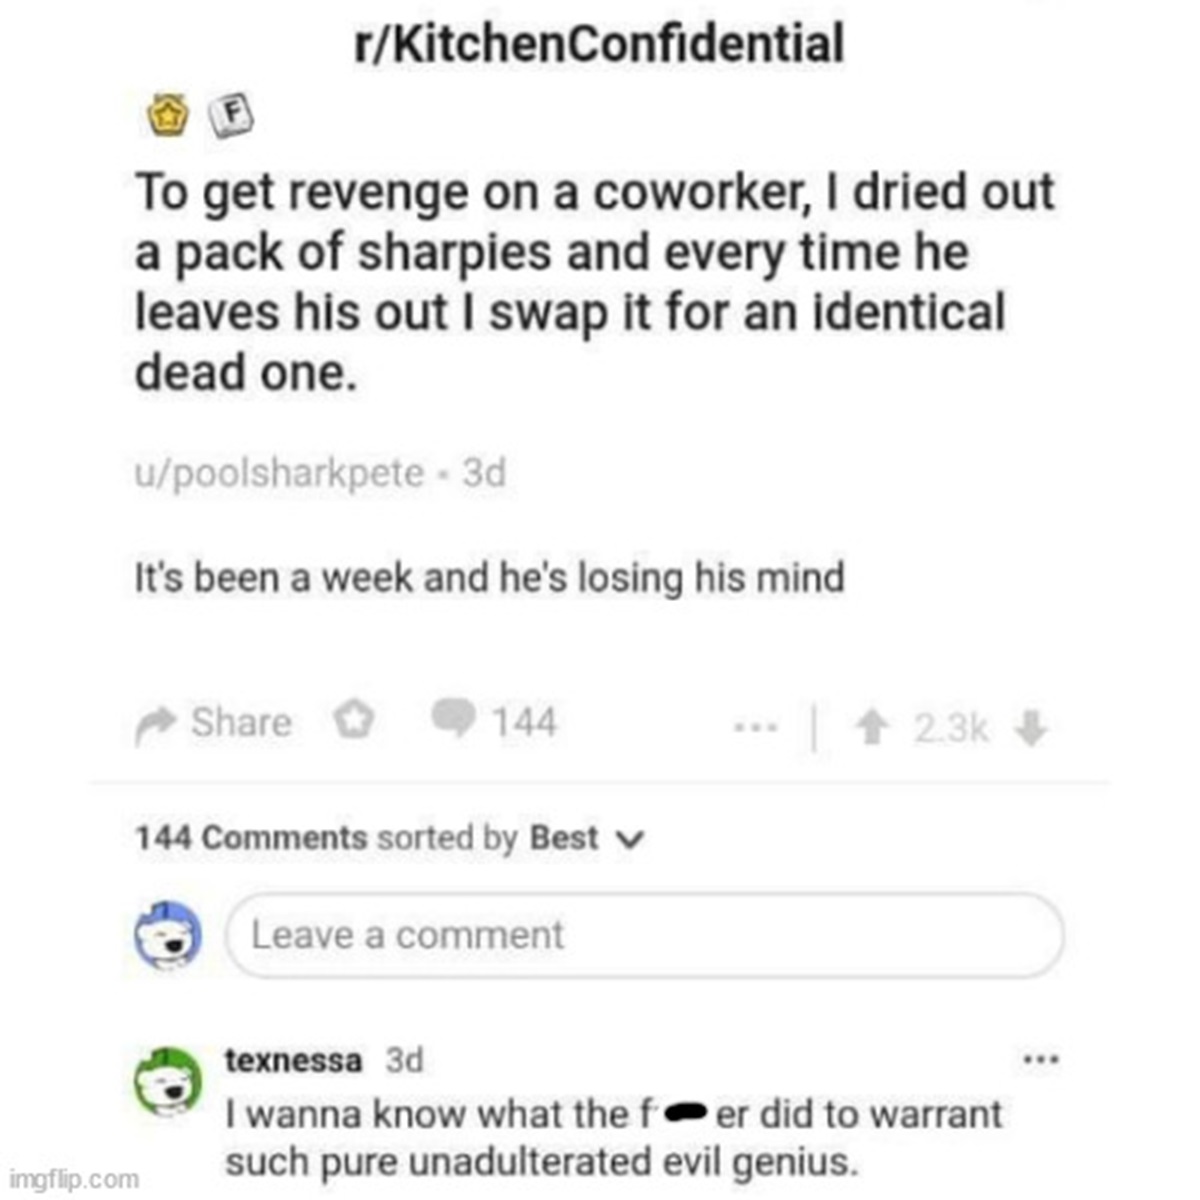 screenshot - rKitchenConfidential To get revenge on a coworker, I dried out a pack of sharpies and every time he leaves his out I swap it for an identical dead one. upoolsharkpete 3d It's been a week and he's losing his mind 144 144 sorted by Best Leave a